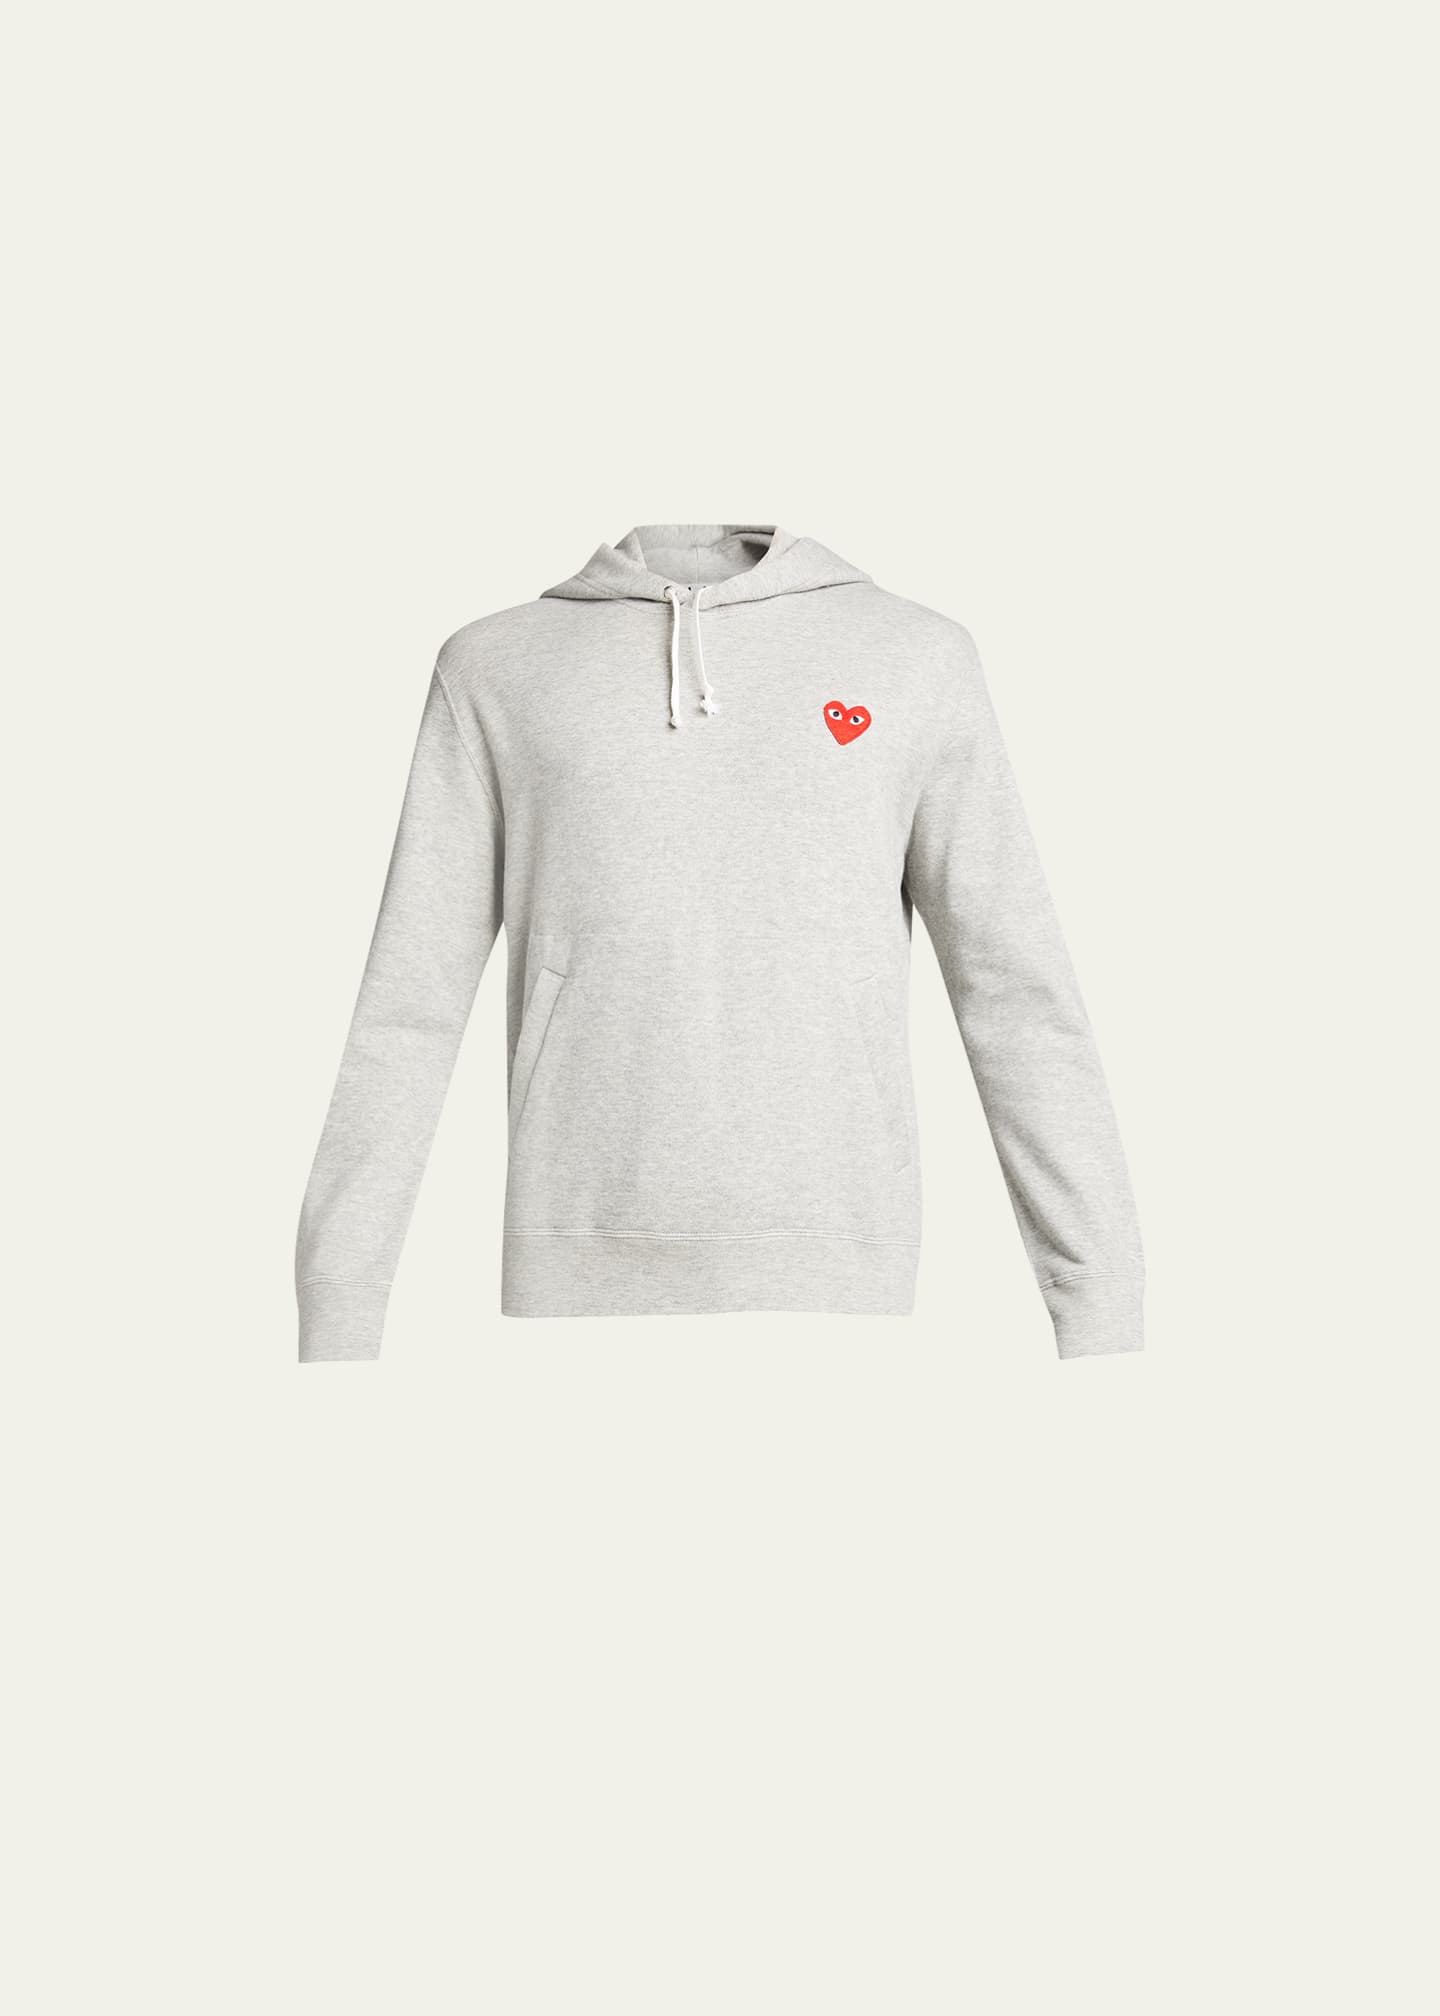 Comme des Garcons Men's Small Heart Pullover Hoodie Image 1 of 5